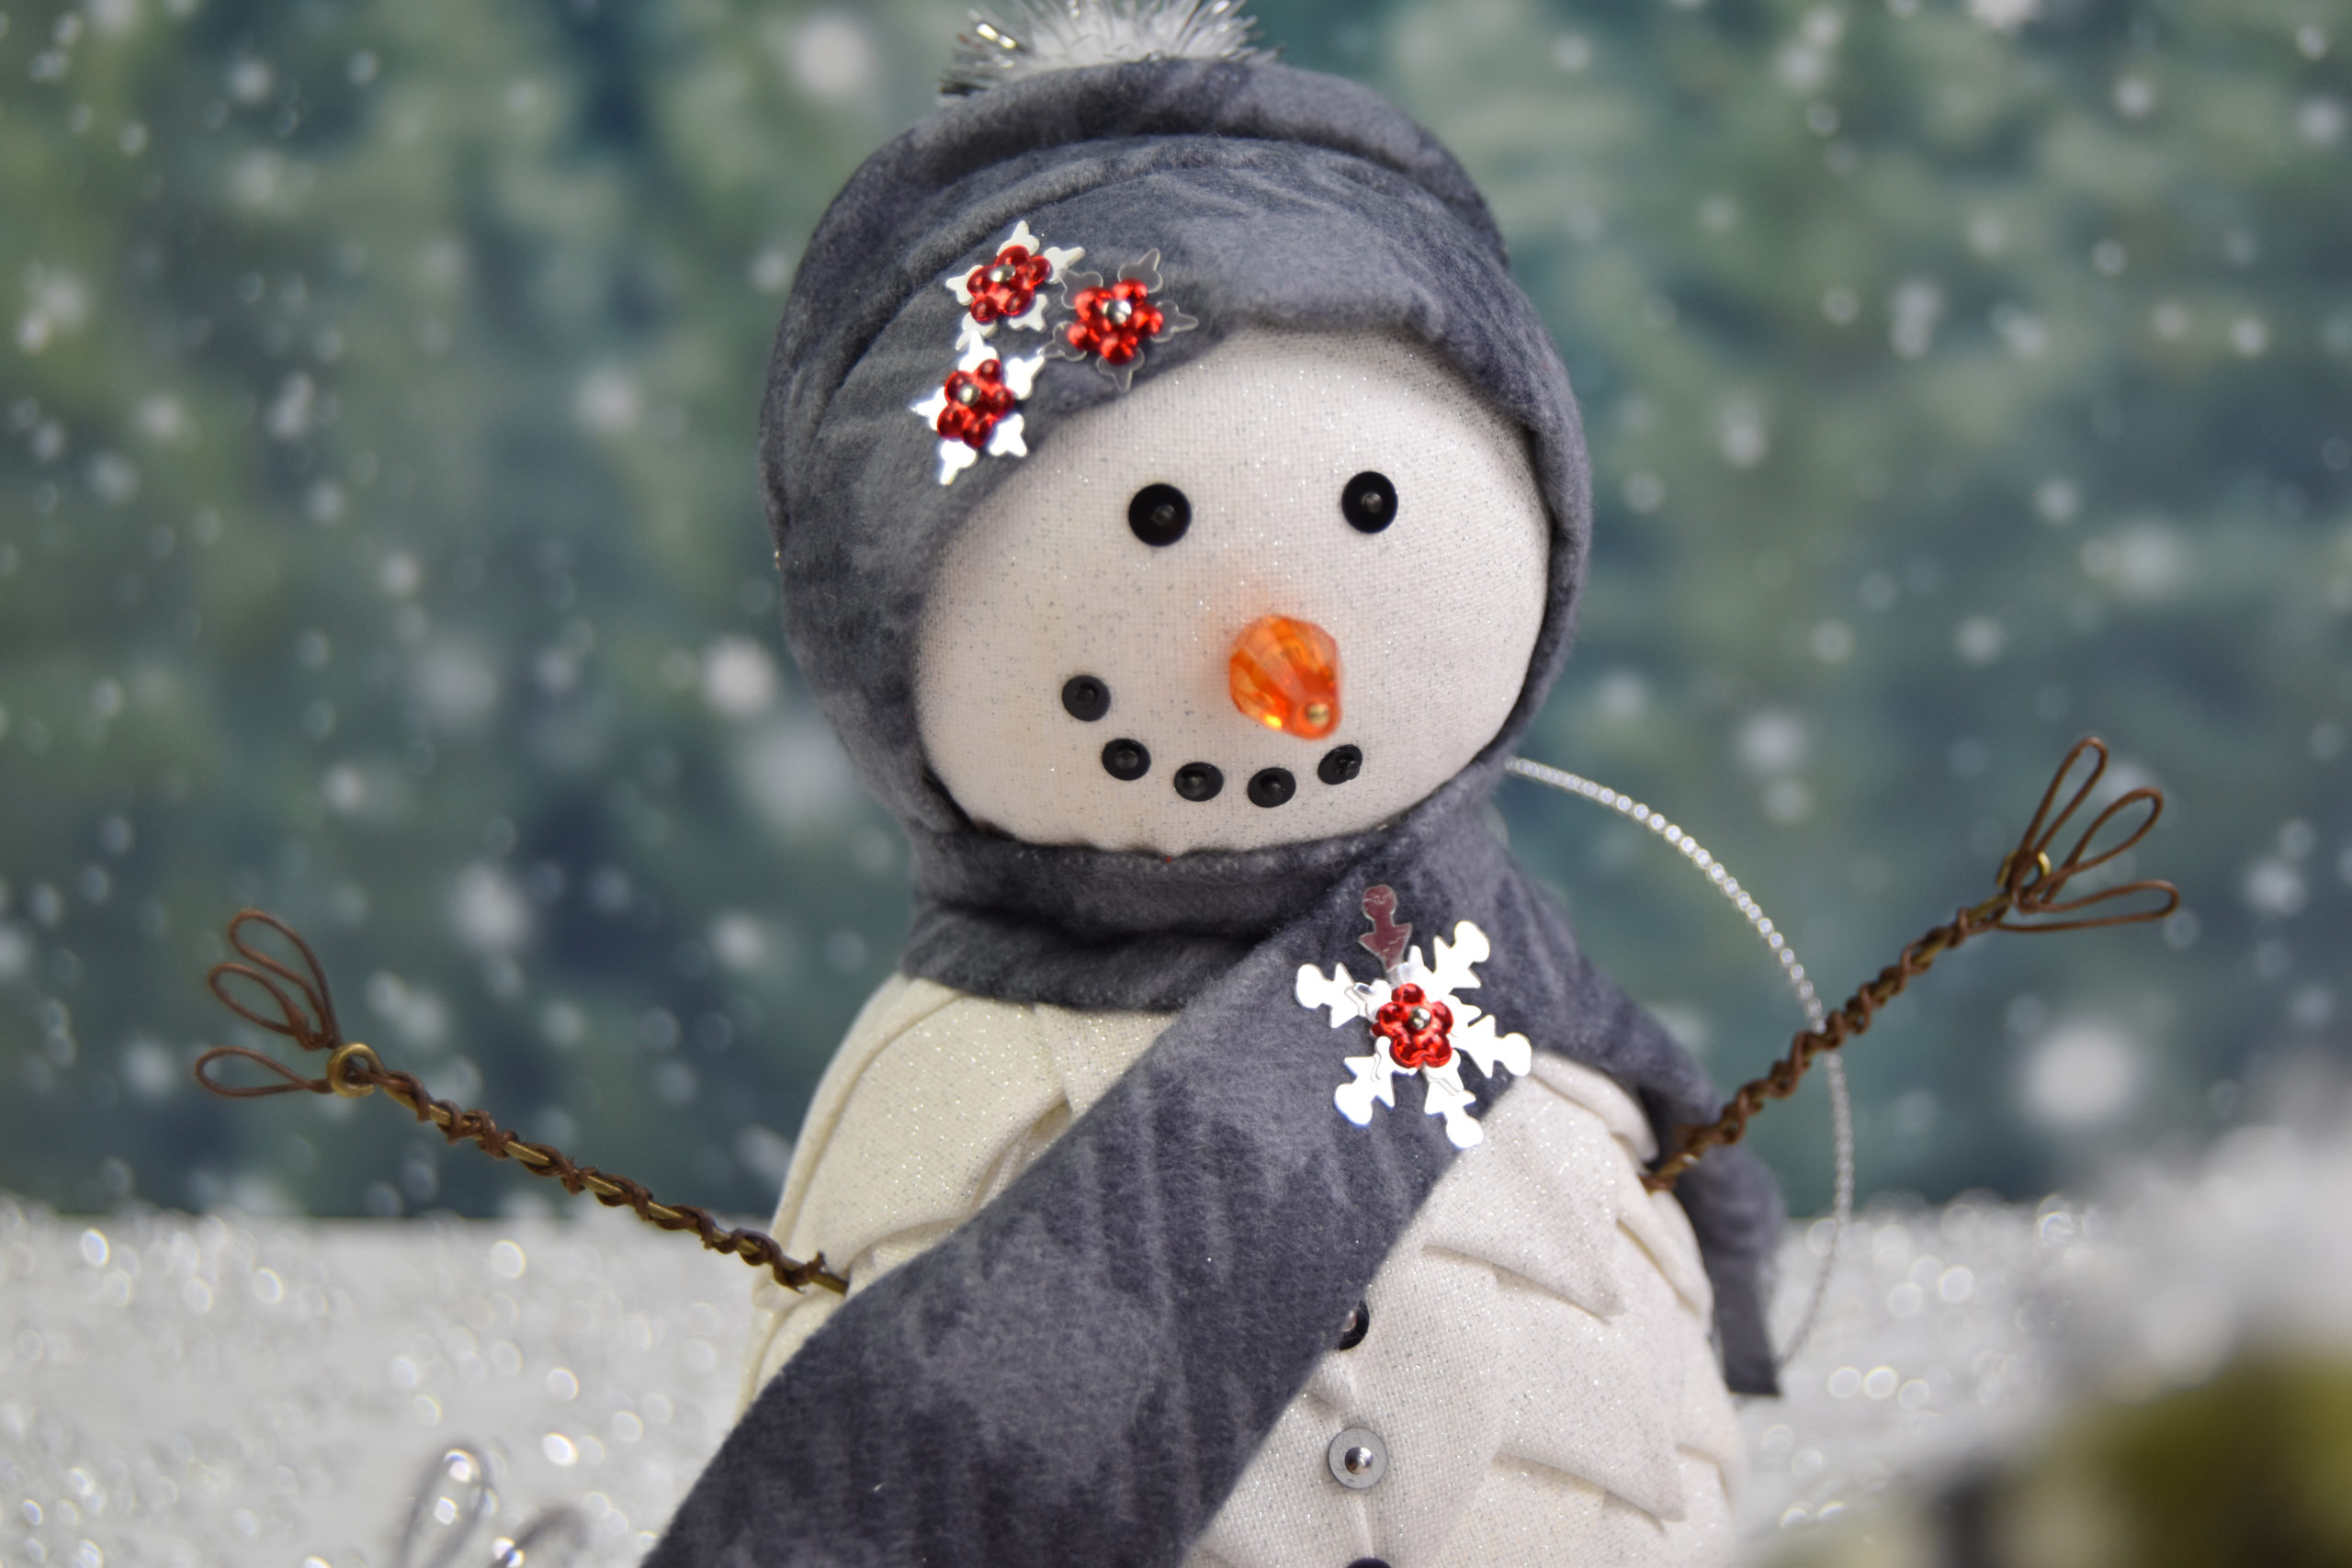 Mistletoe - Snowman Mini Kit - Fabric Scarf and Hat, Sequins, Nose, Arms,  and More